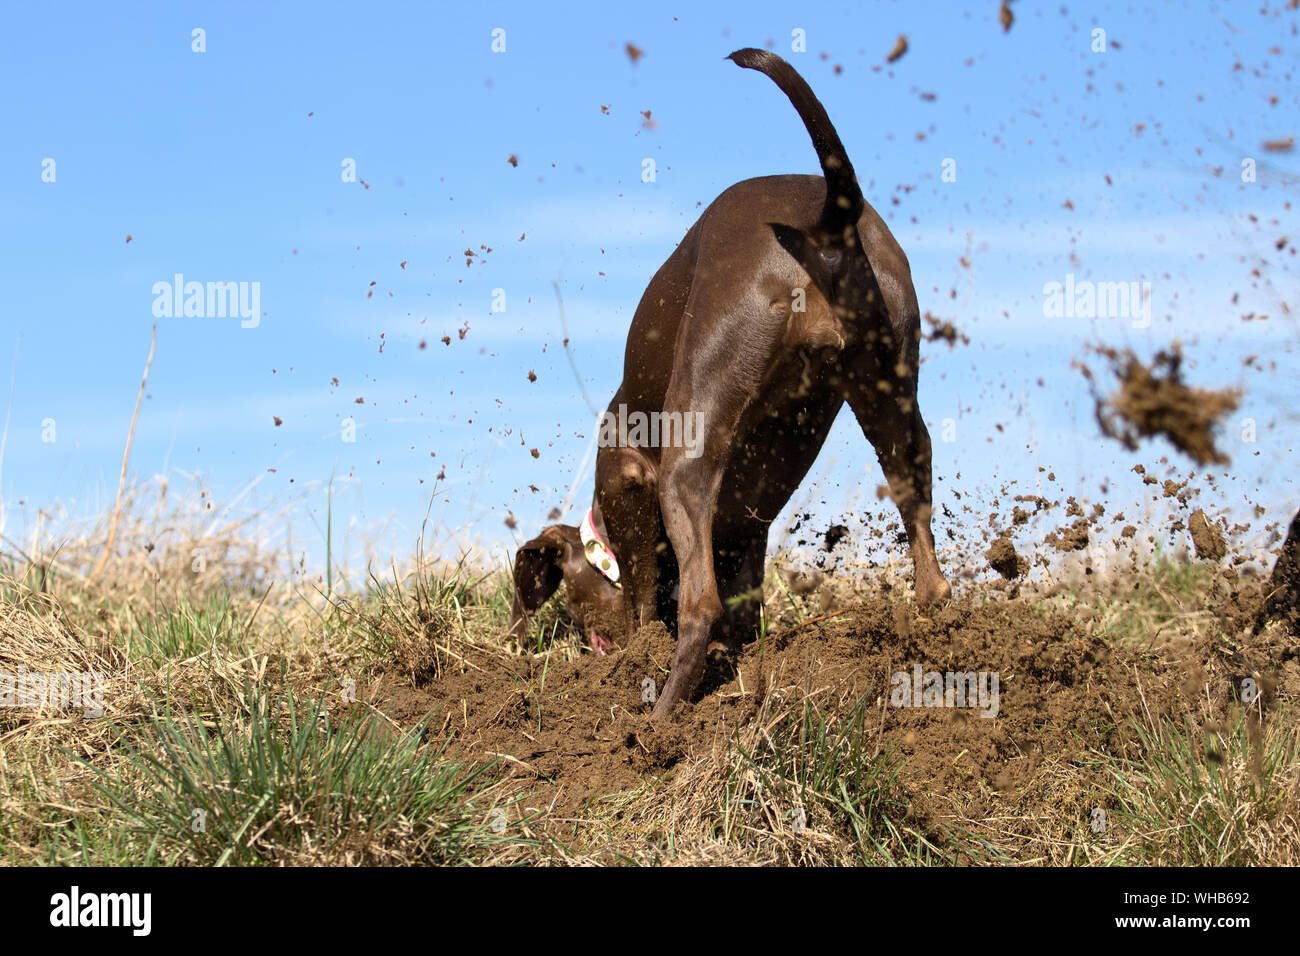 Rear View Of Dog Digging Dirt Against Sky Stock Photo